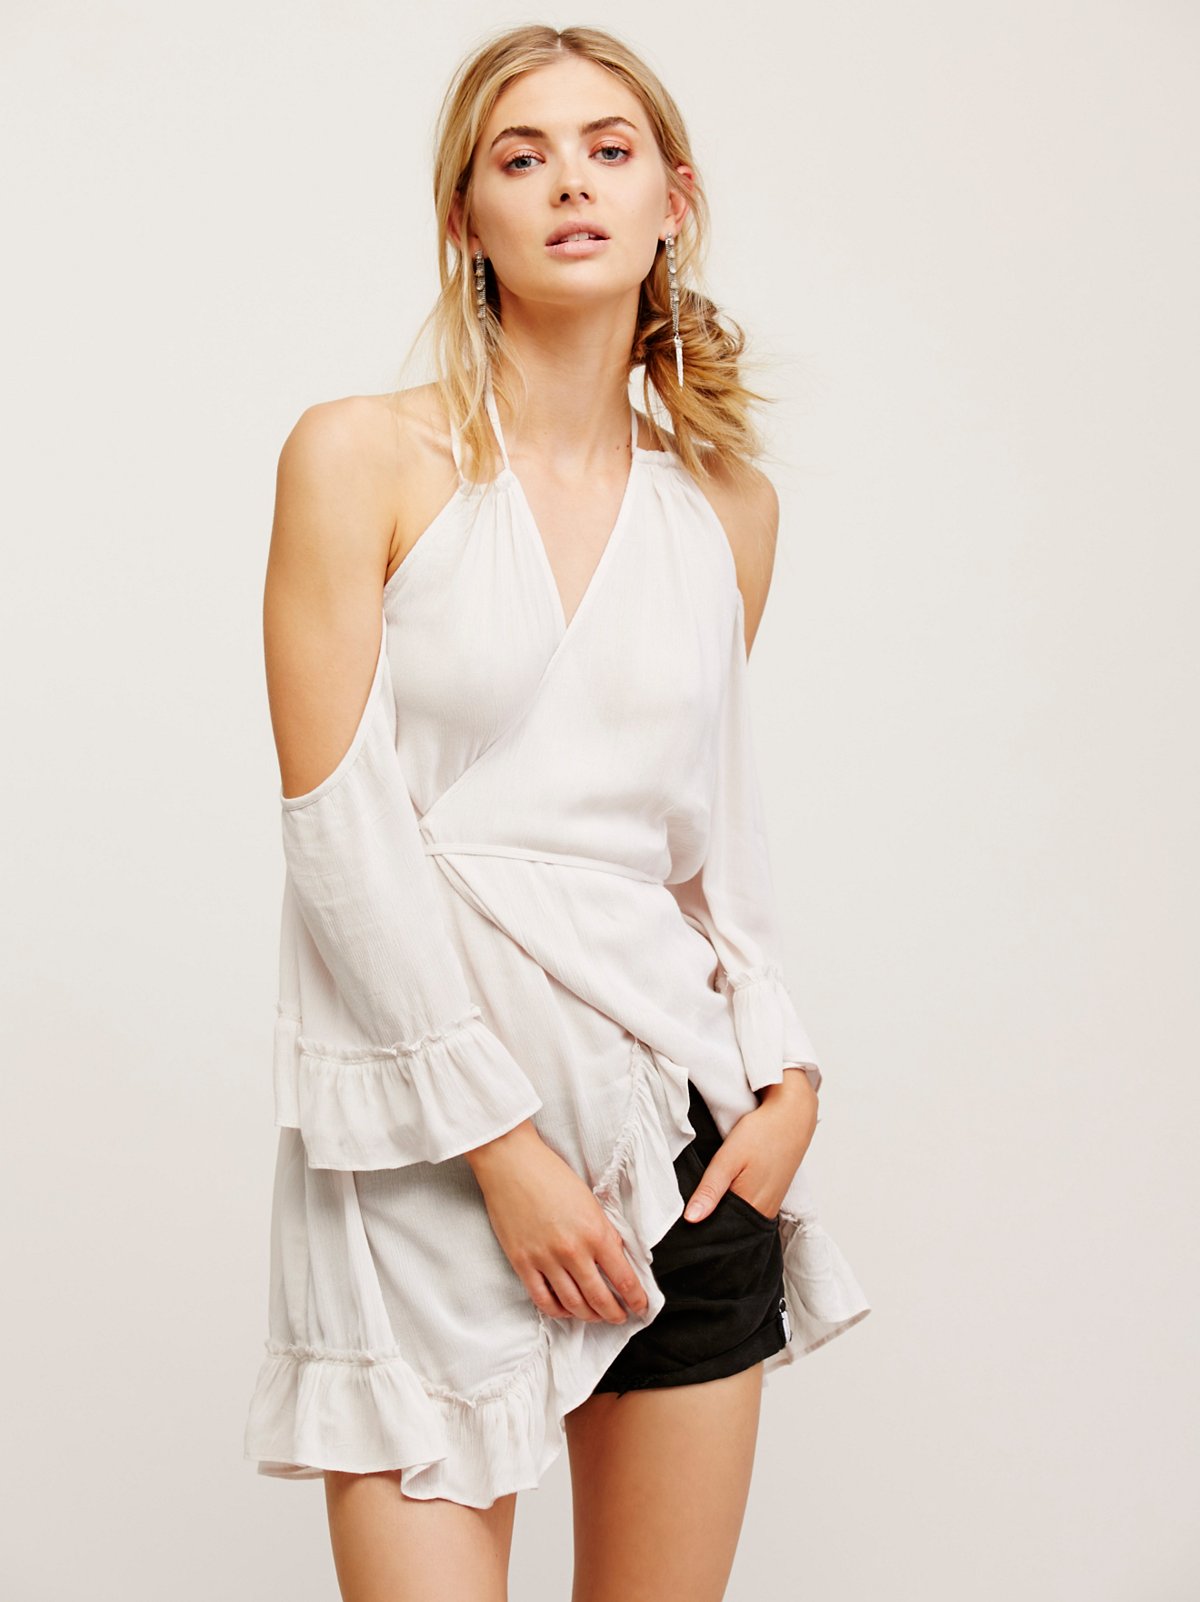 Endless Summer Ray of Sun Wrap Tunic at Free People Clothing Boutique